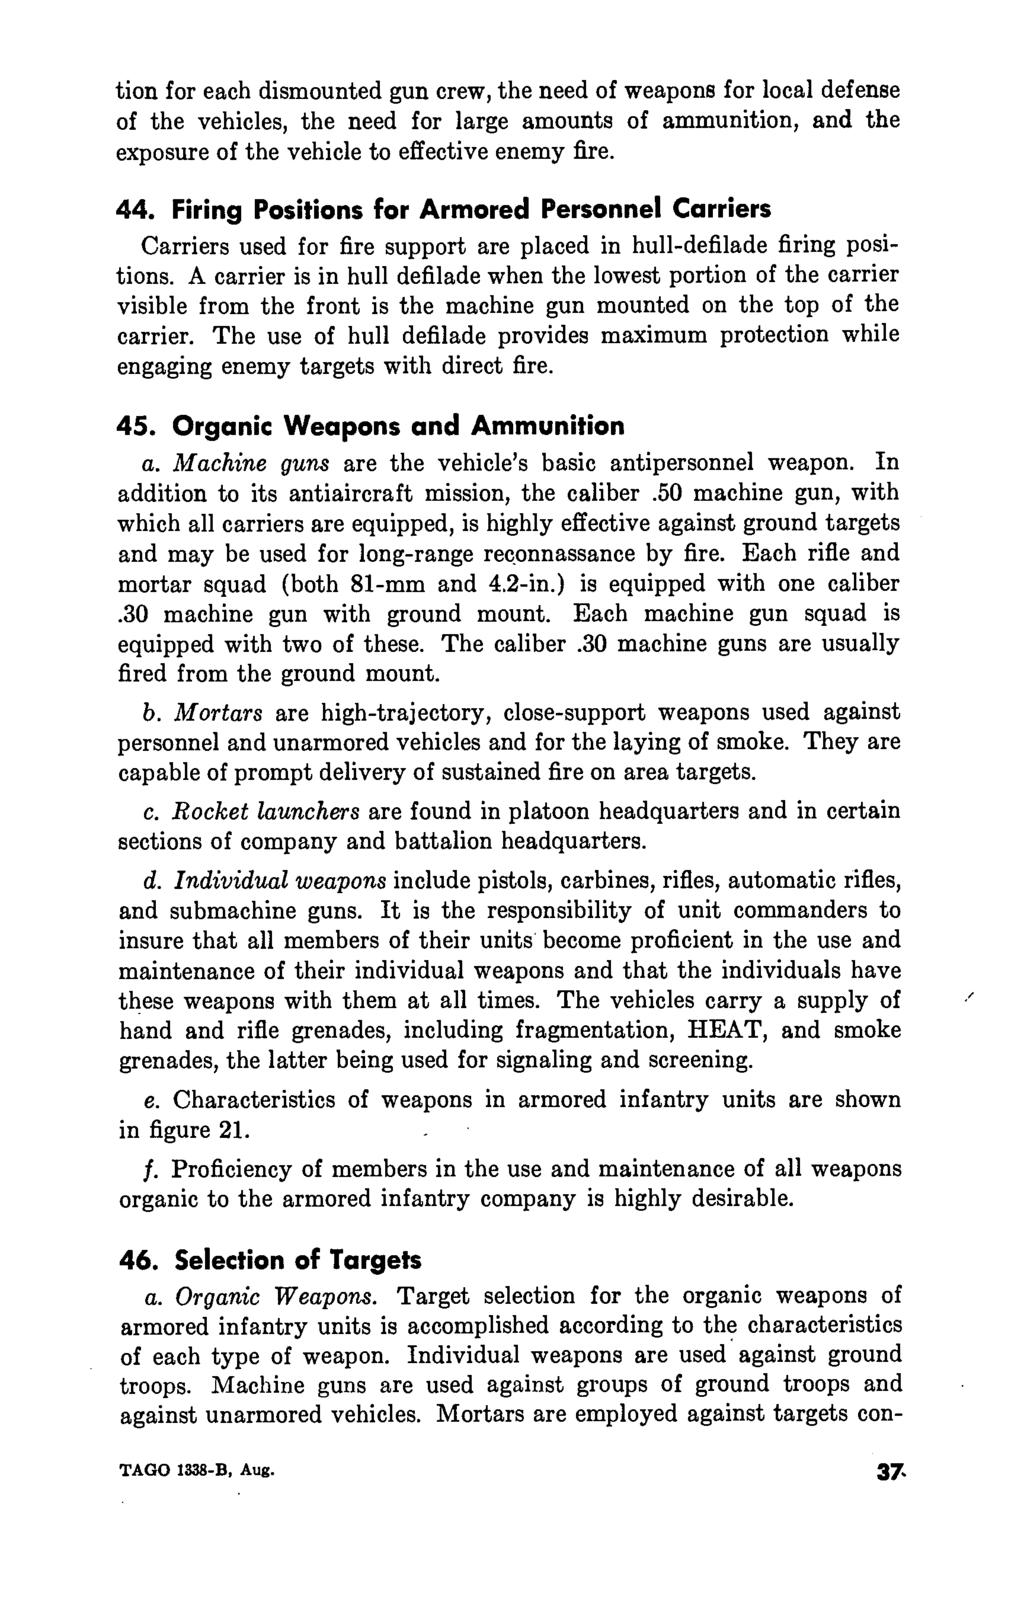 tion for each dismounted gun crew, the need of weapons for local defense of the vehicles, the need for large amounts of ammunition, and the exposure of the vehicle to effective enemy fire. 44.